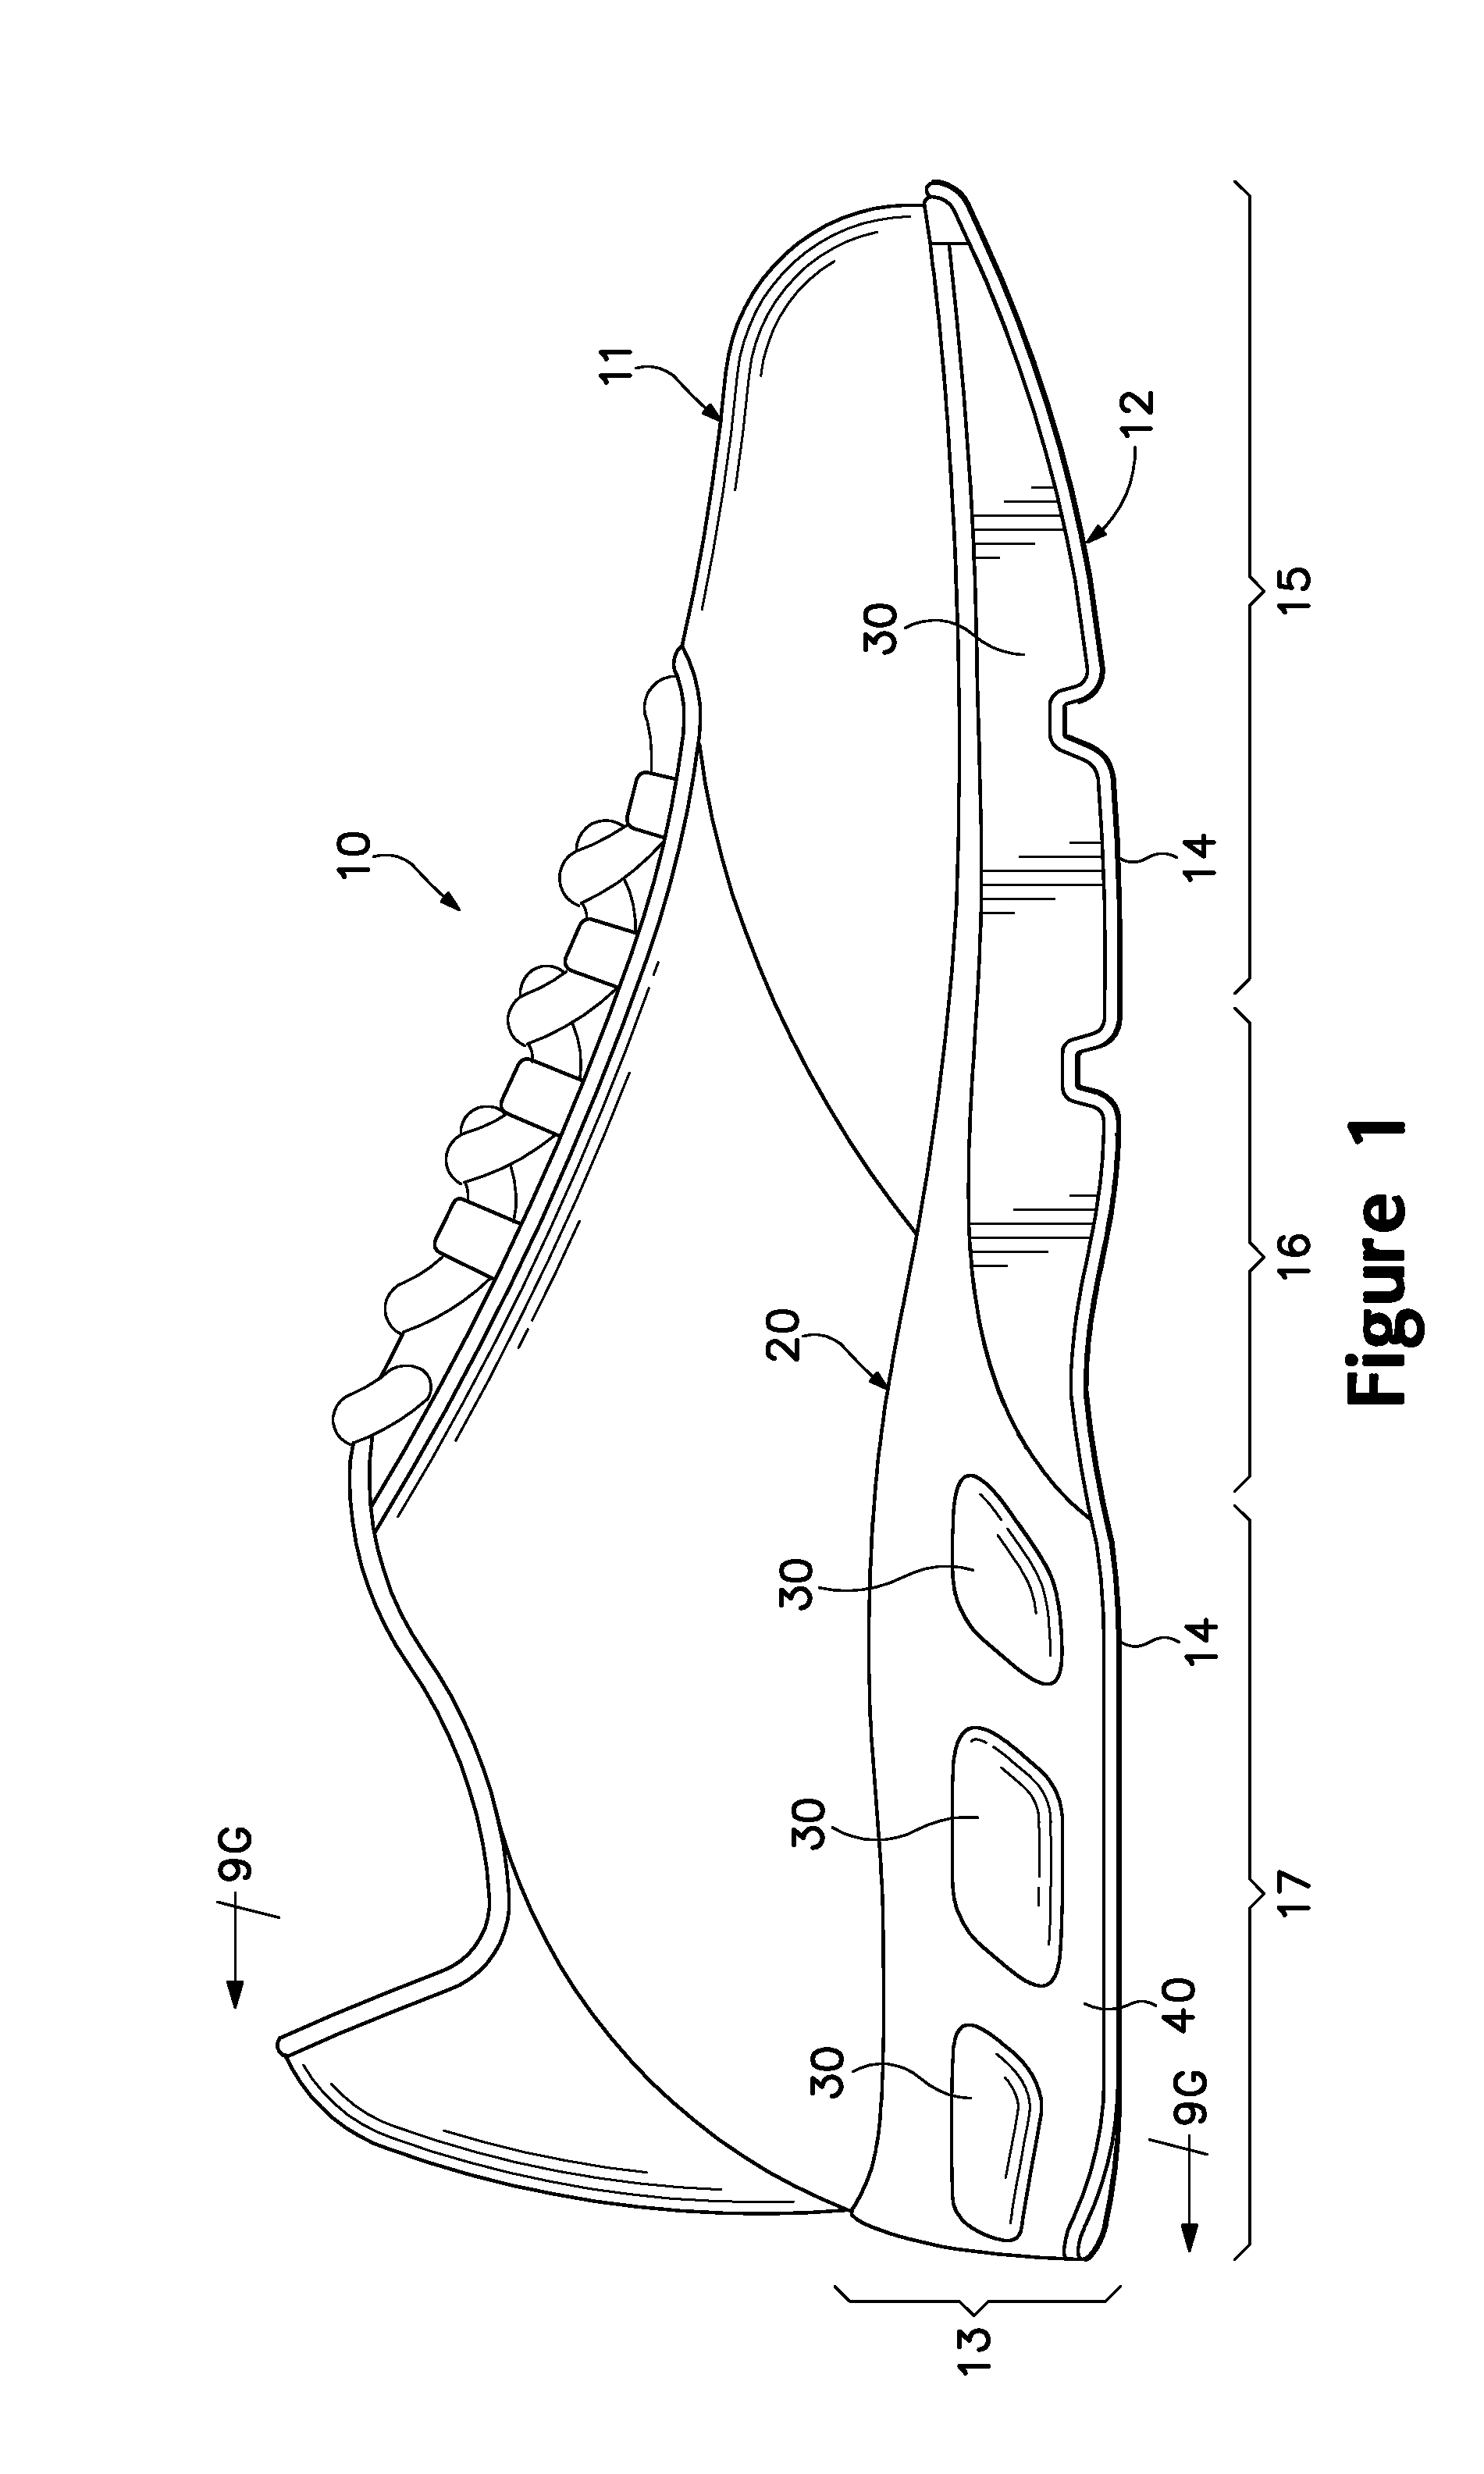 Article Of Footwear Having A Fluid-Filled Bladder With A Reinforcing Structure